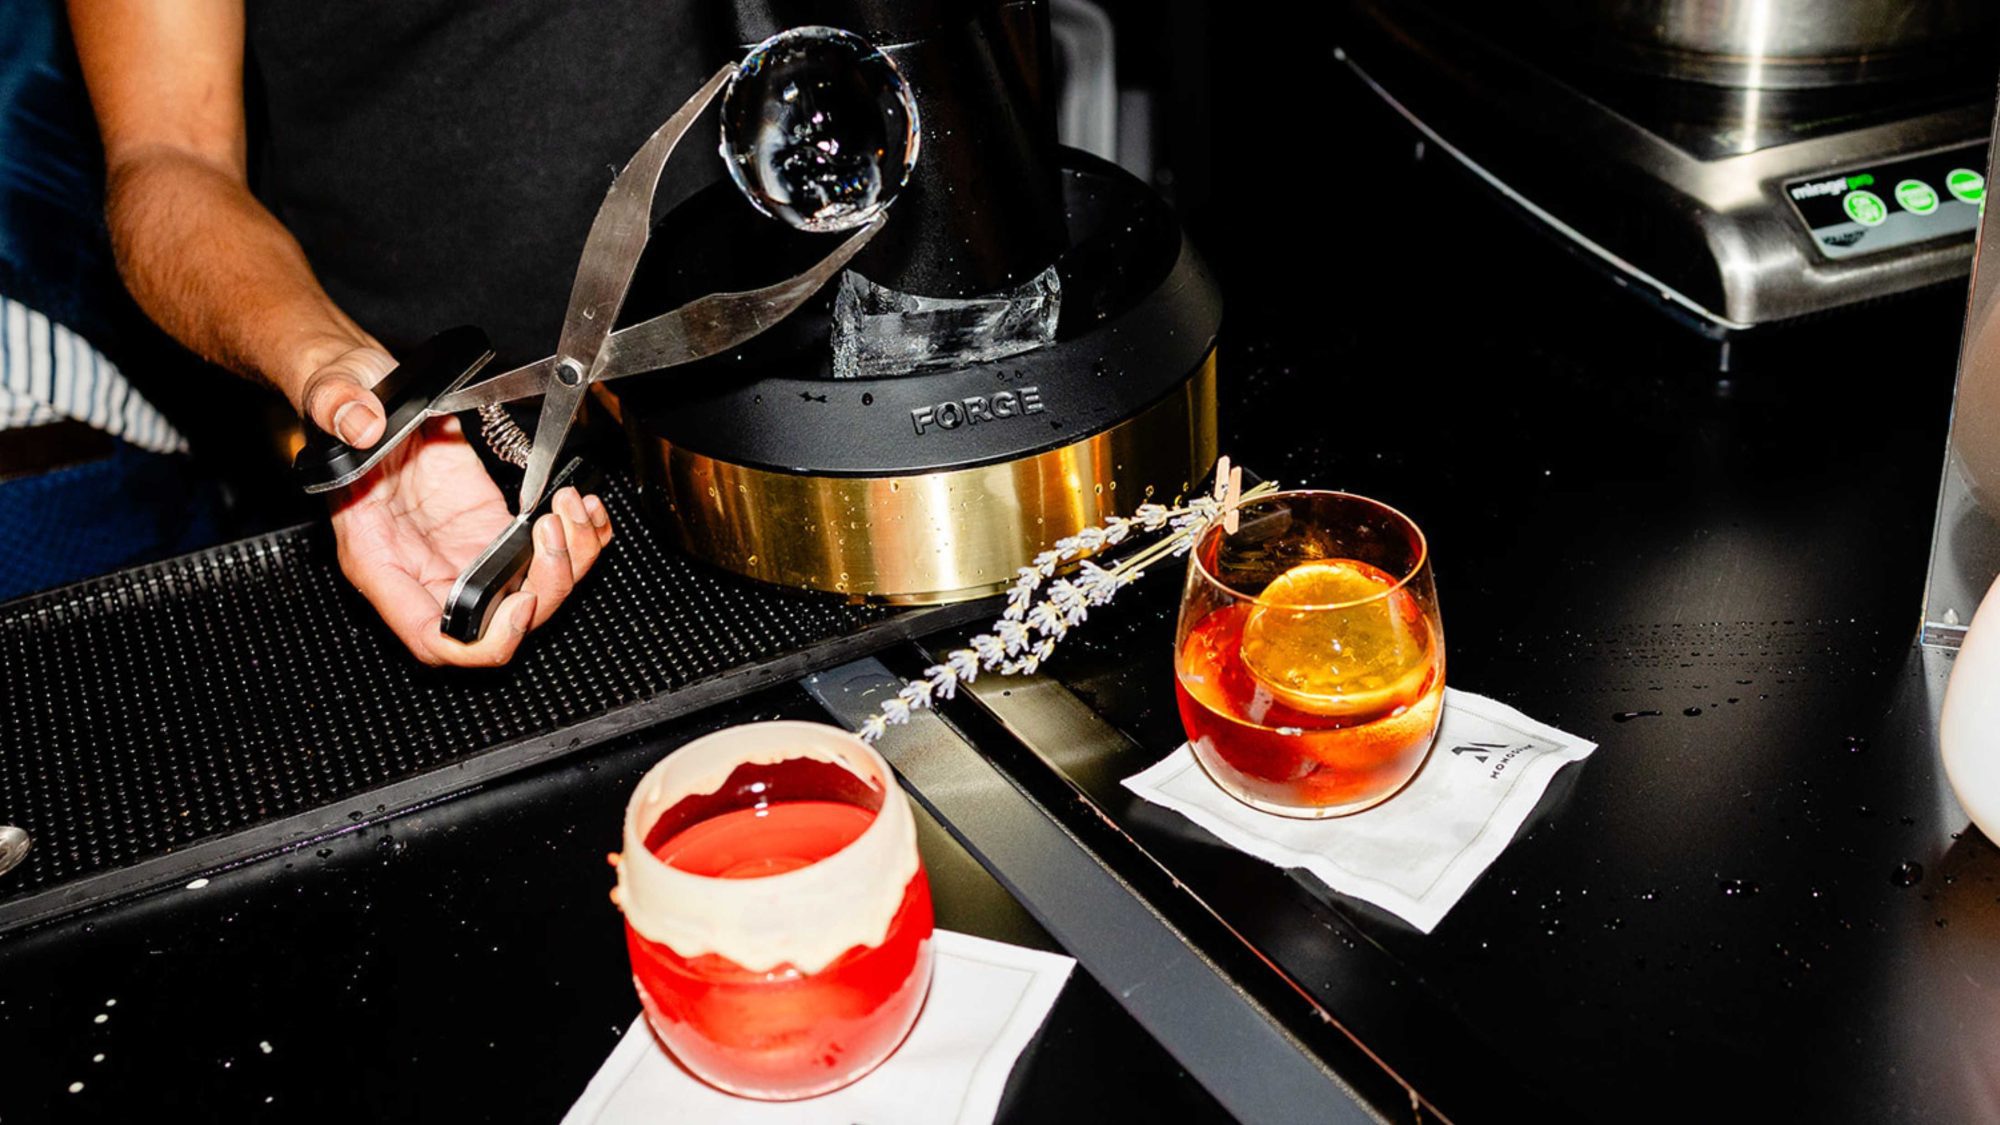 The Monogram Forge: Where Luxury Meets Mixology in Your Home Bar